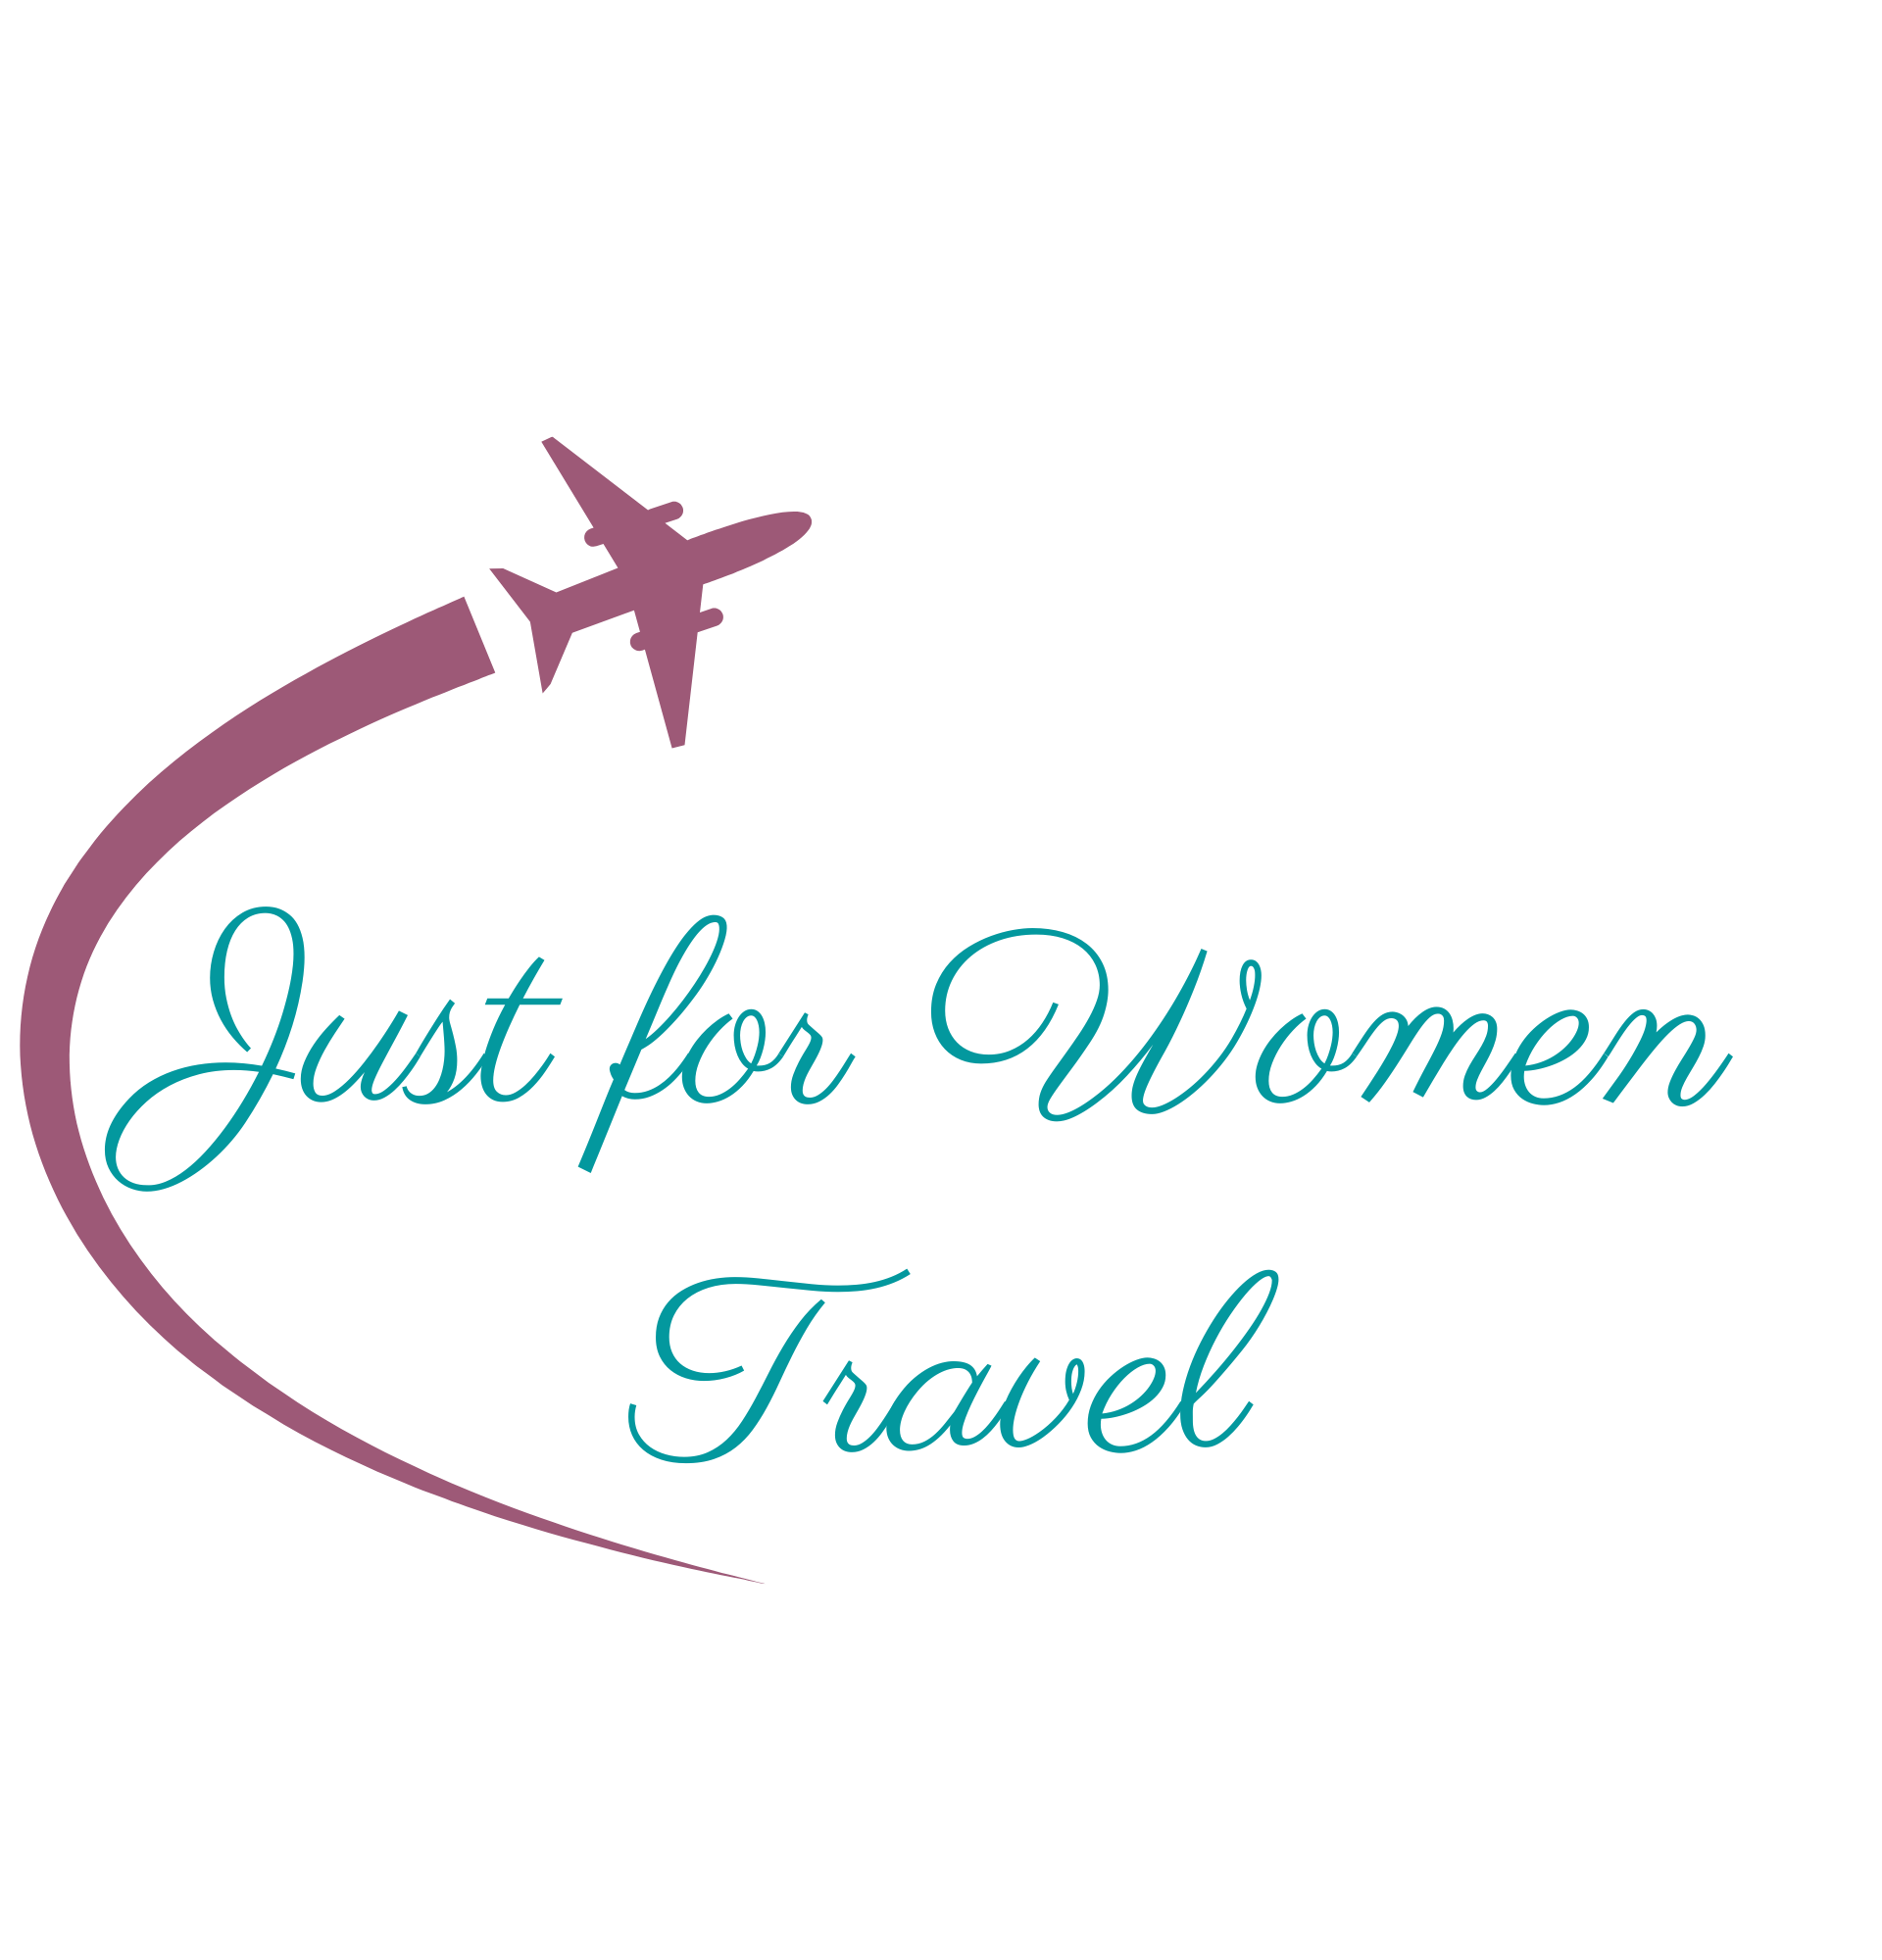 Just for Women Travel